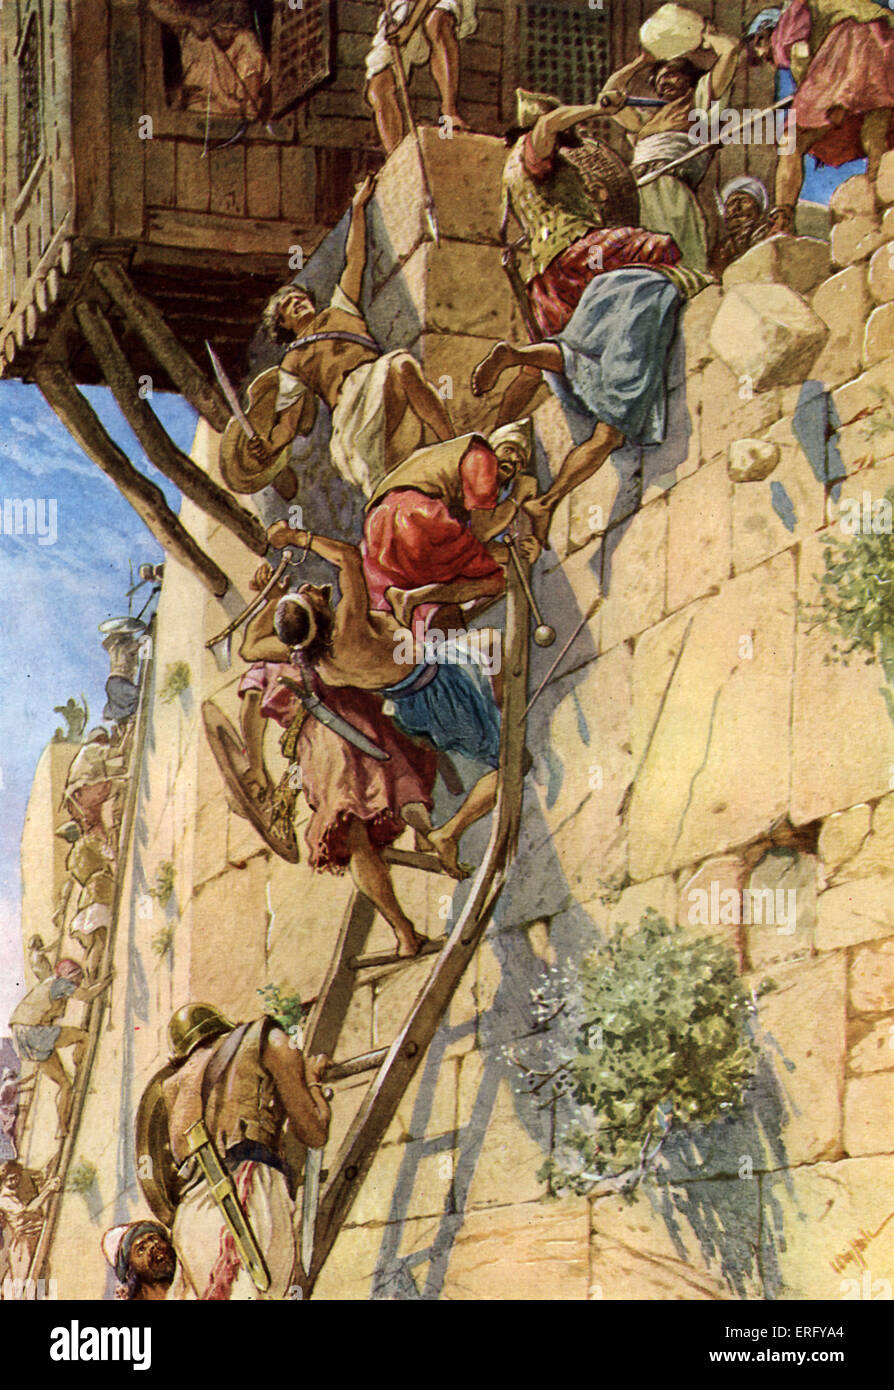 The capture of Jerusalem from the Jebusites - the Israelites scale the walls of Jerusalem. C. 869 -1003 BCE  Illustration by Stock Photo